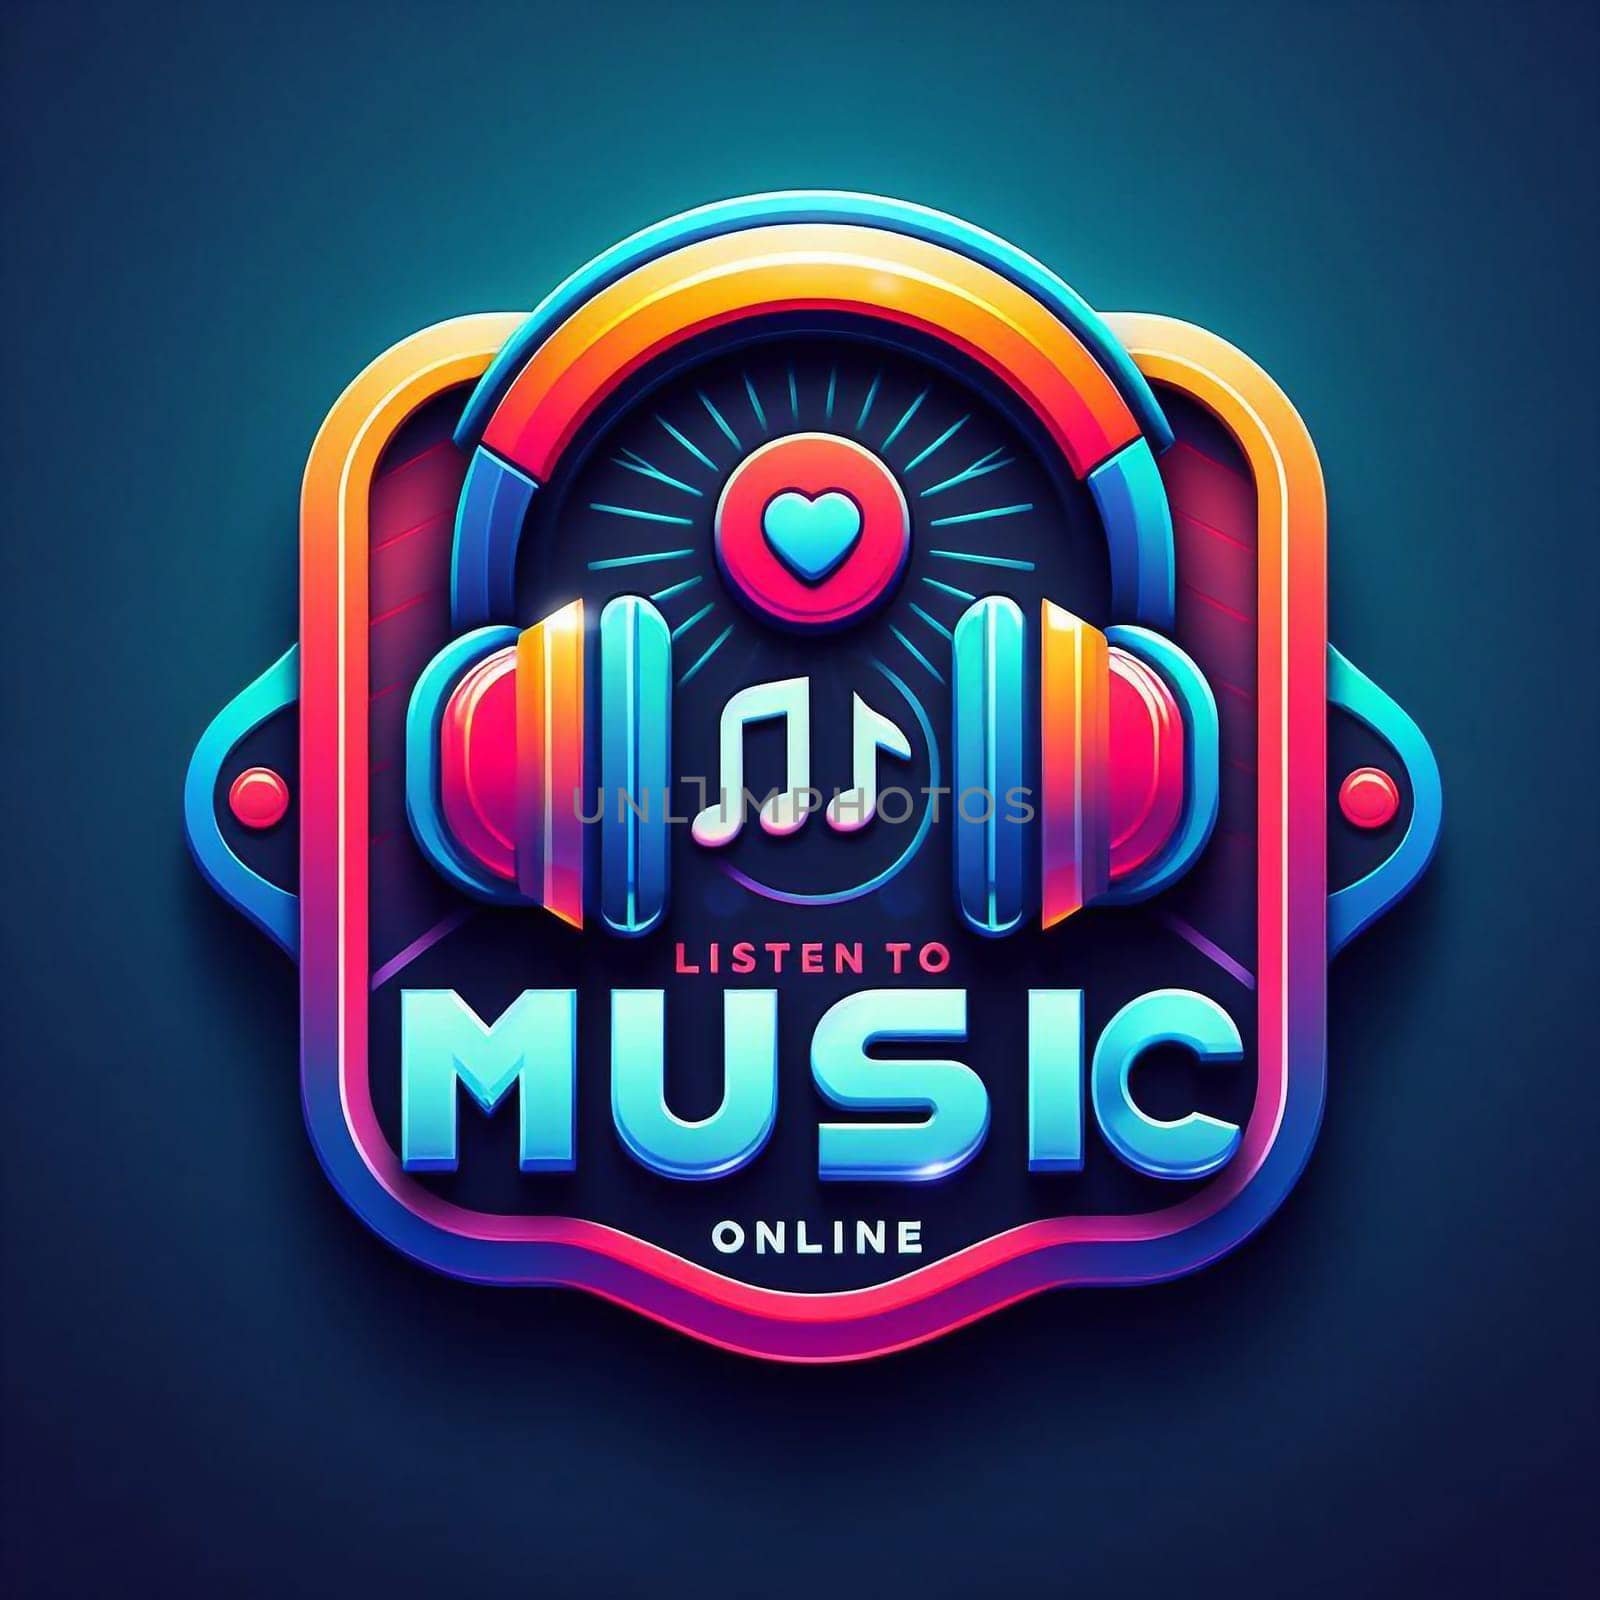 Listen to music and podcasts online logo by architectphd